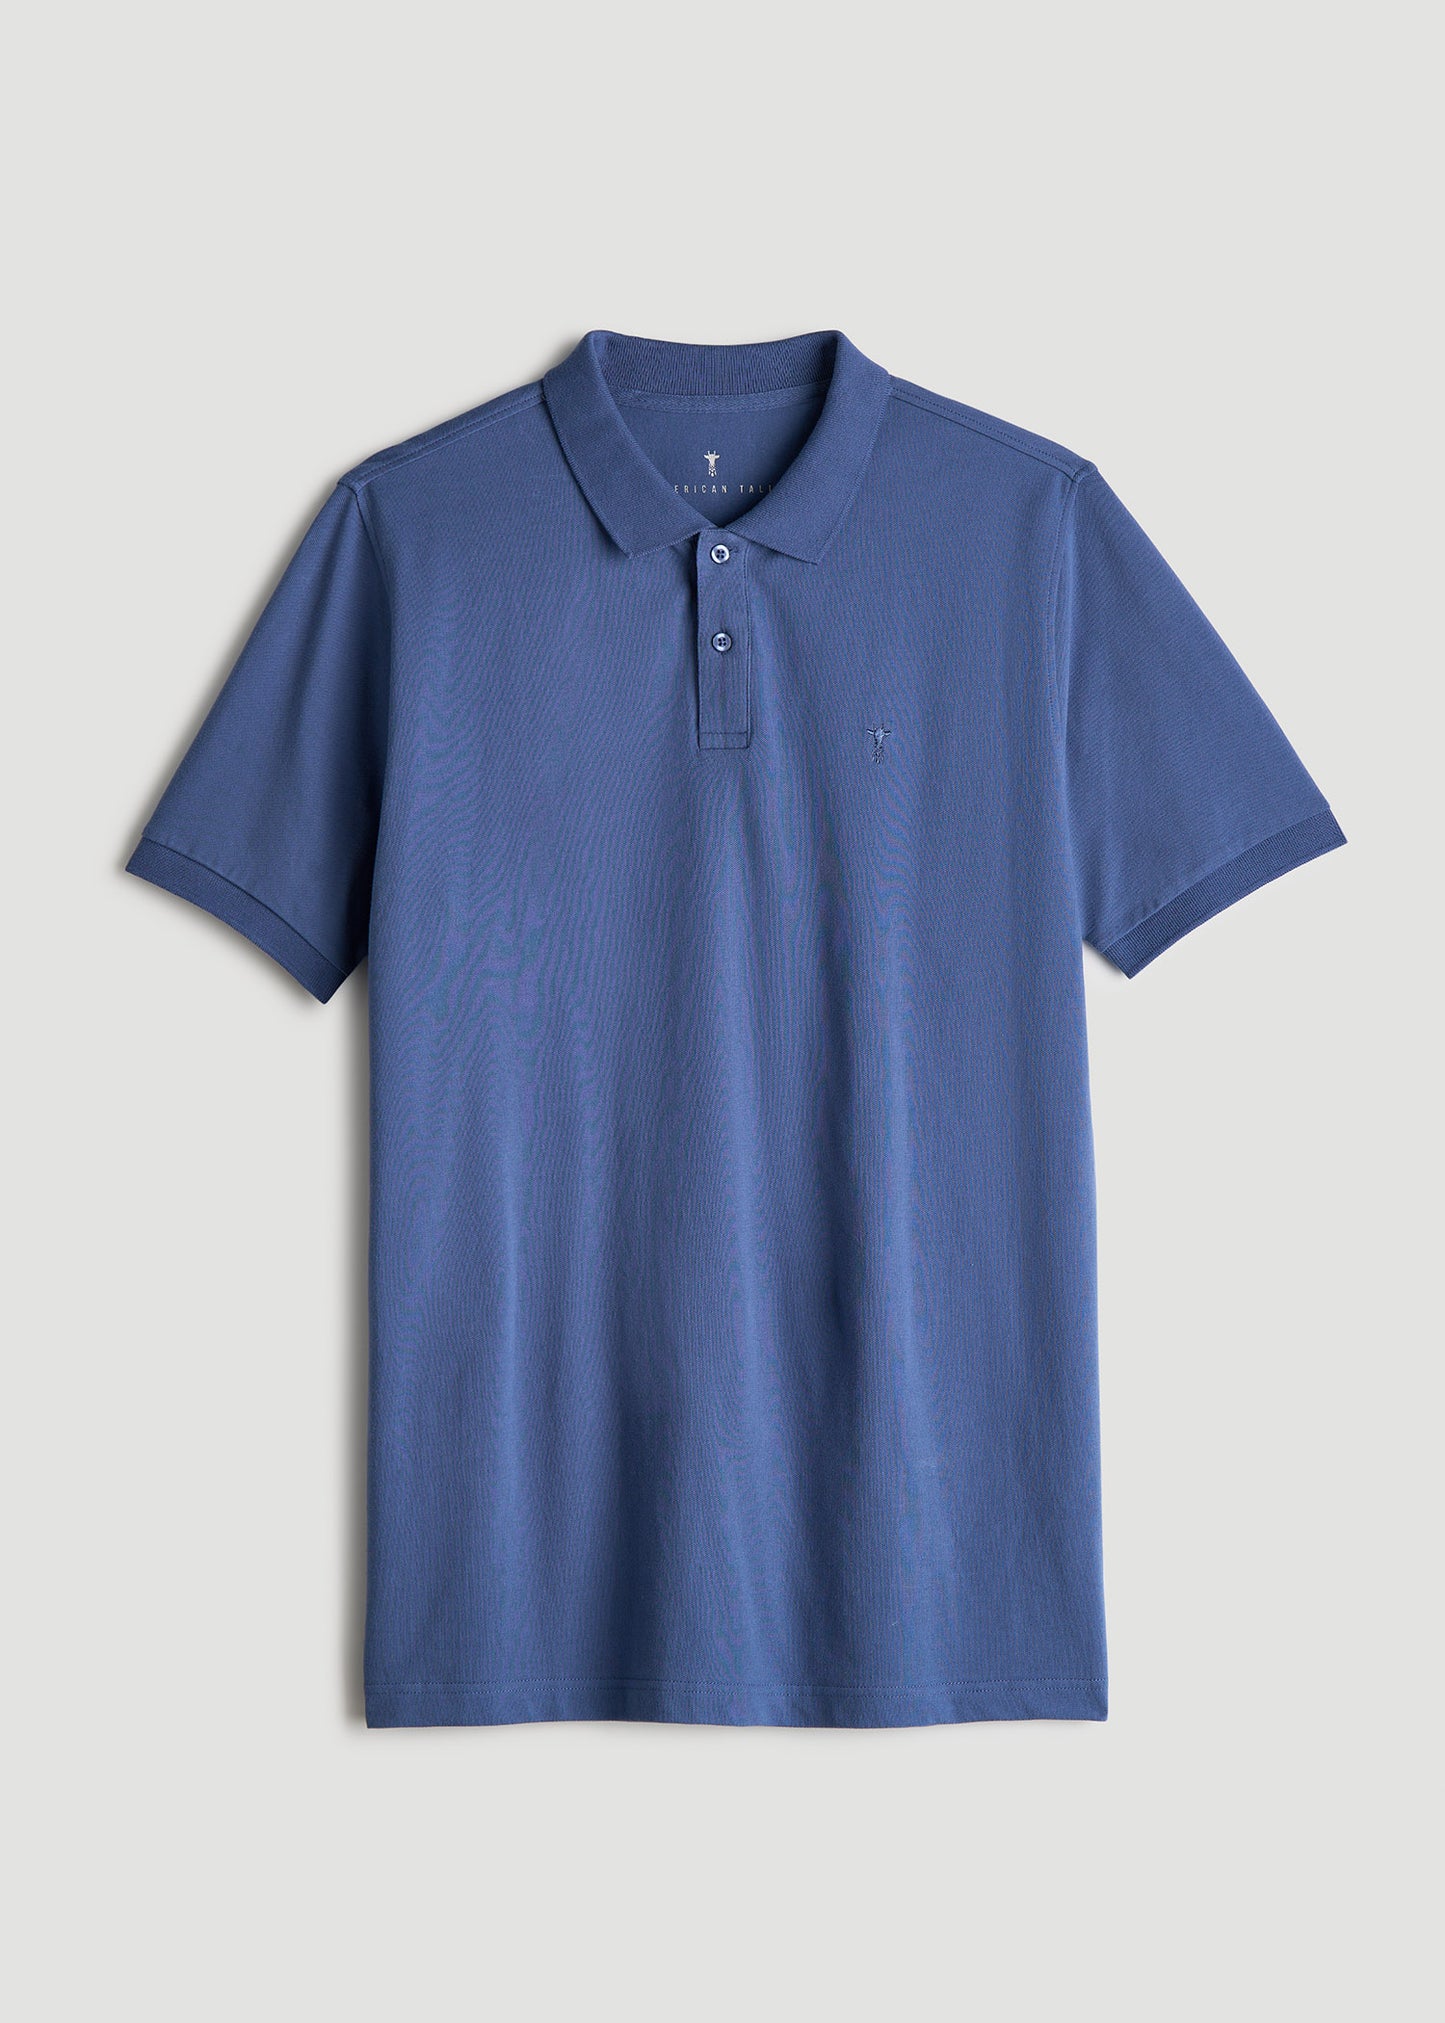 Men's Tall Classic Polo with Embroidered Logo in Cherry brown